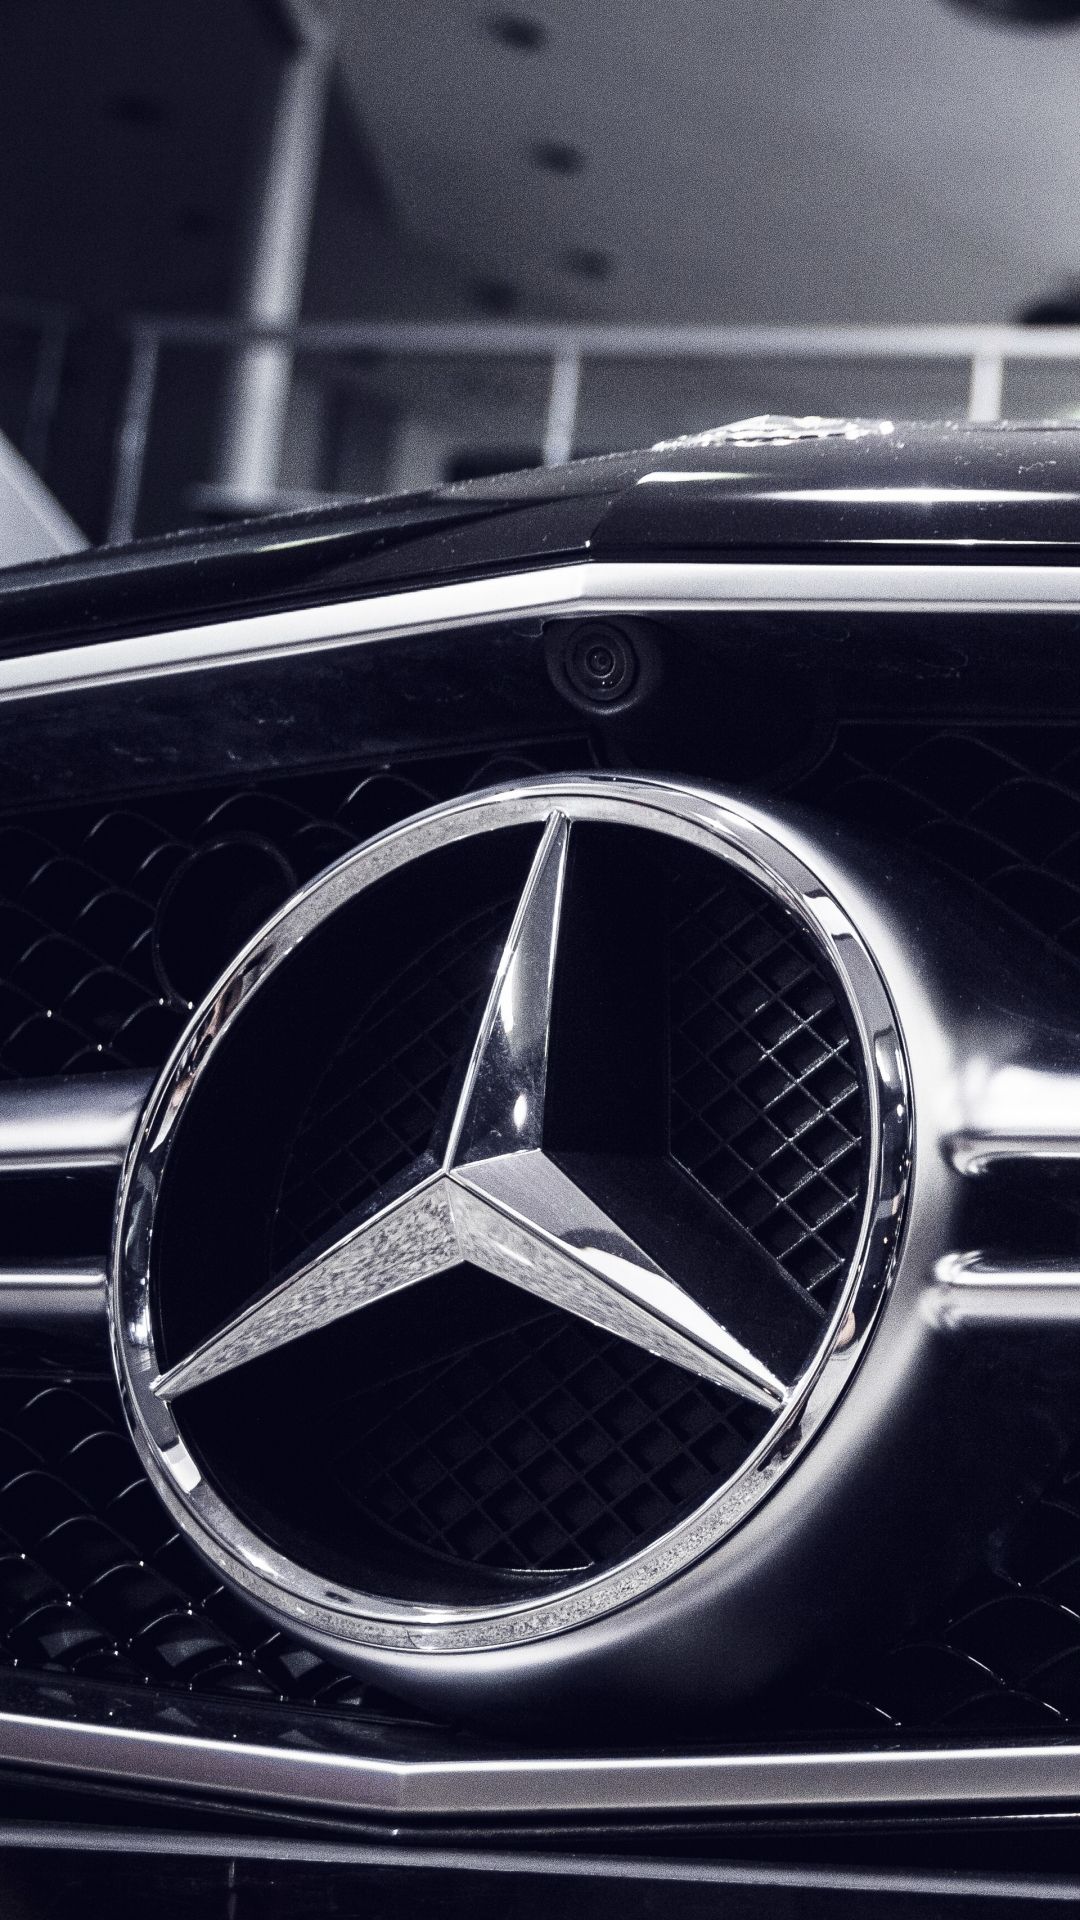 Mercedes Logo Wallpapers Group (72+)